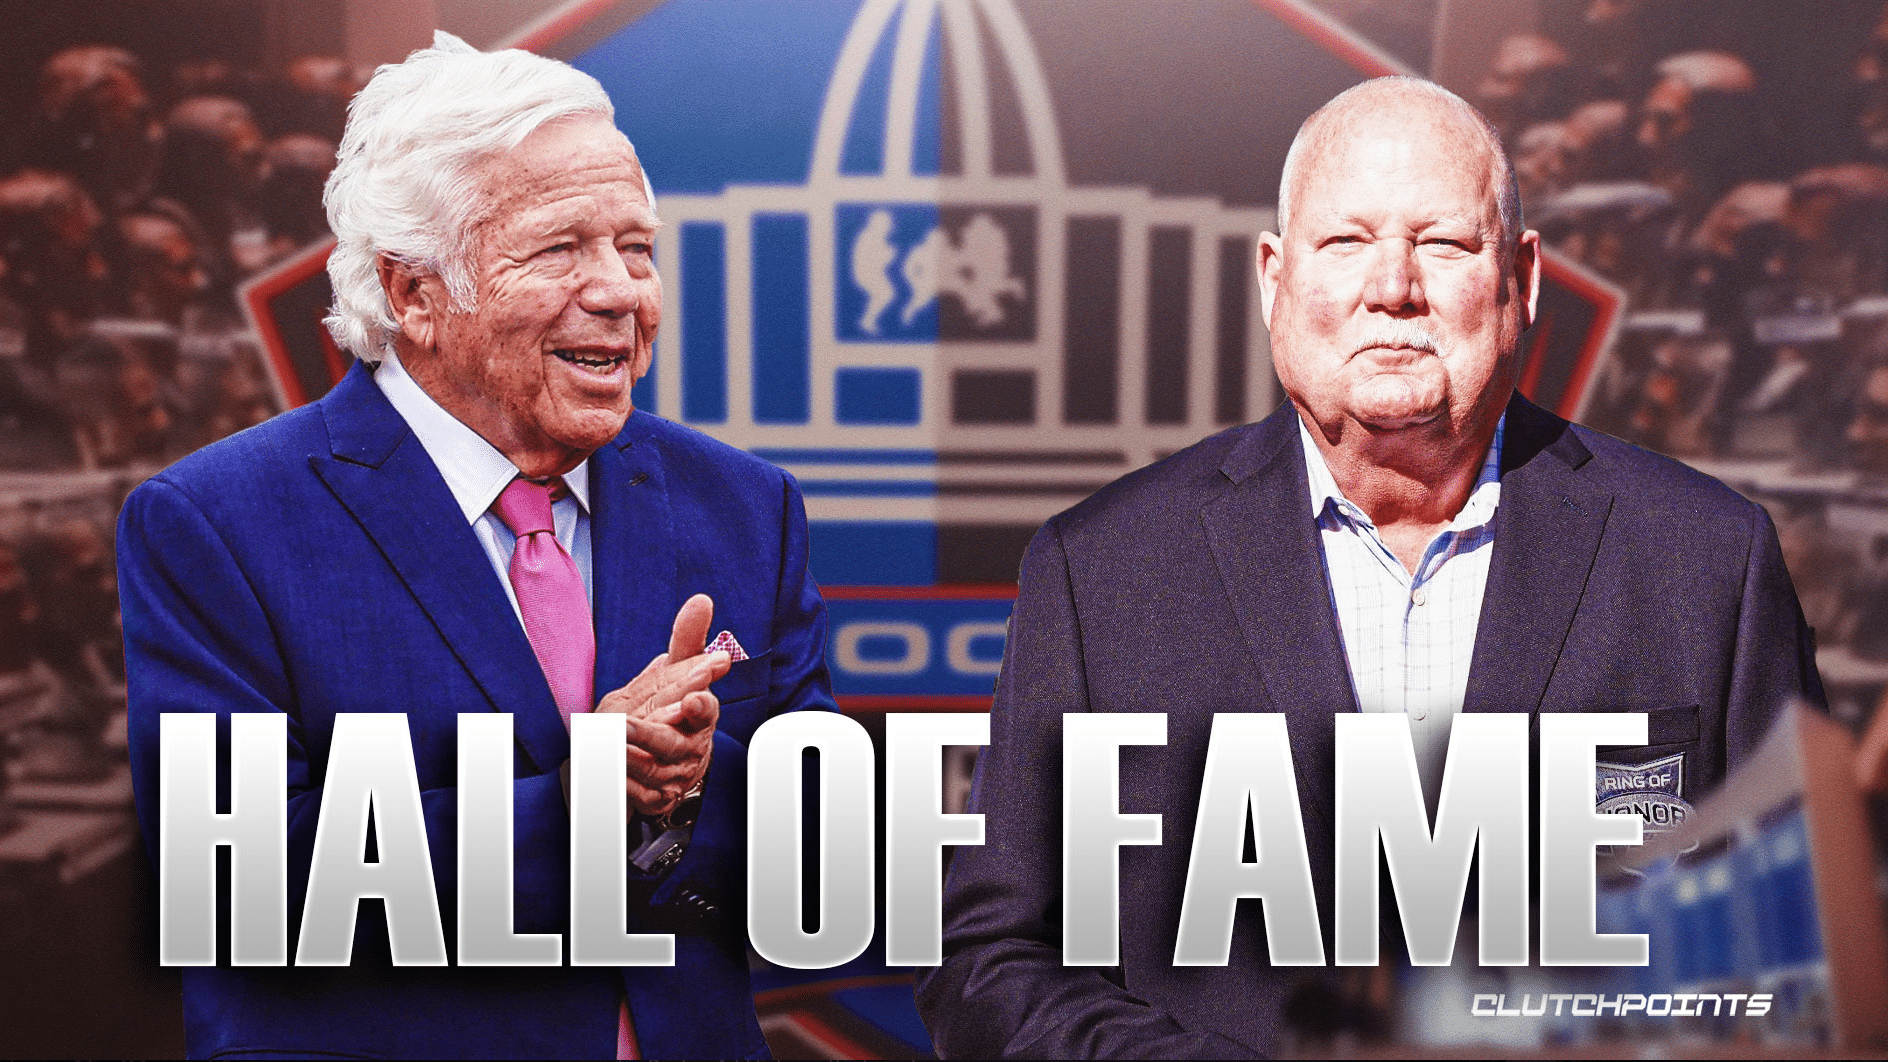 NFL Hall of Fame semifinalists include Robert Kraft, Mike Holmgren